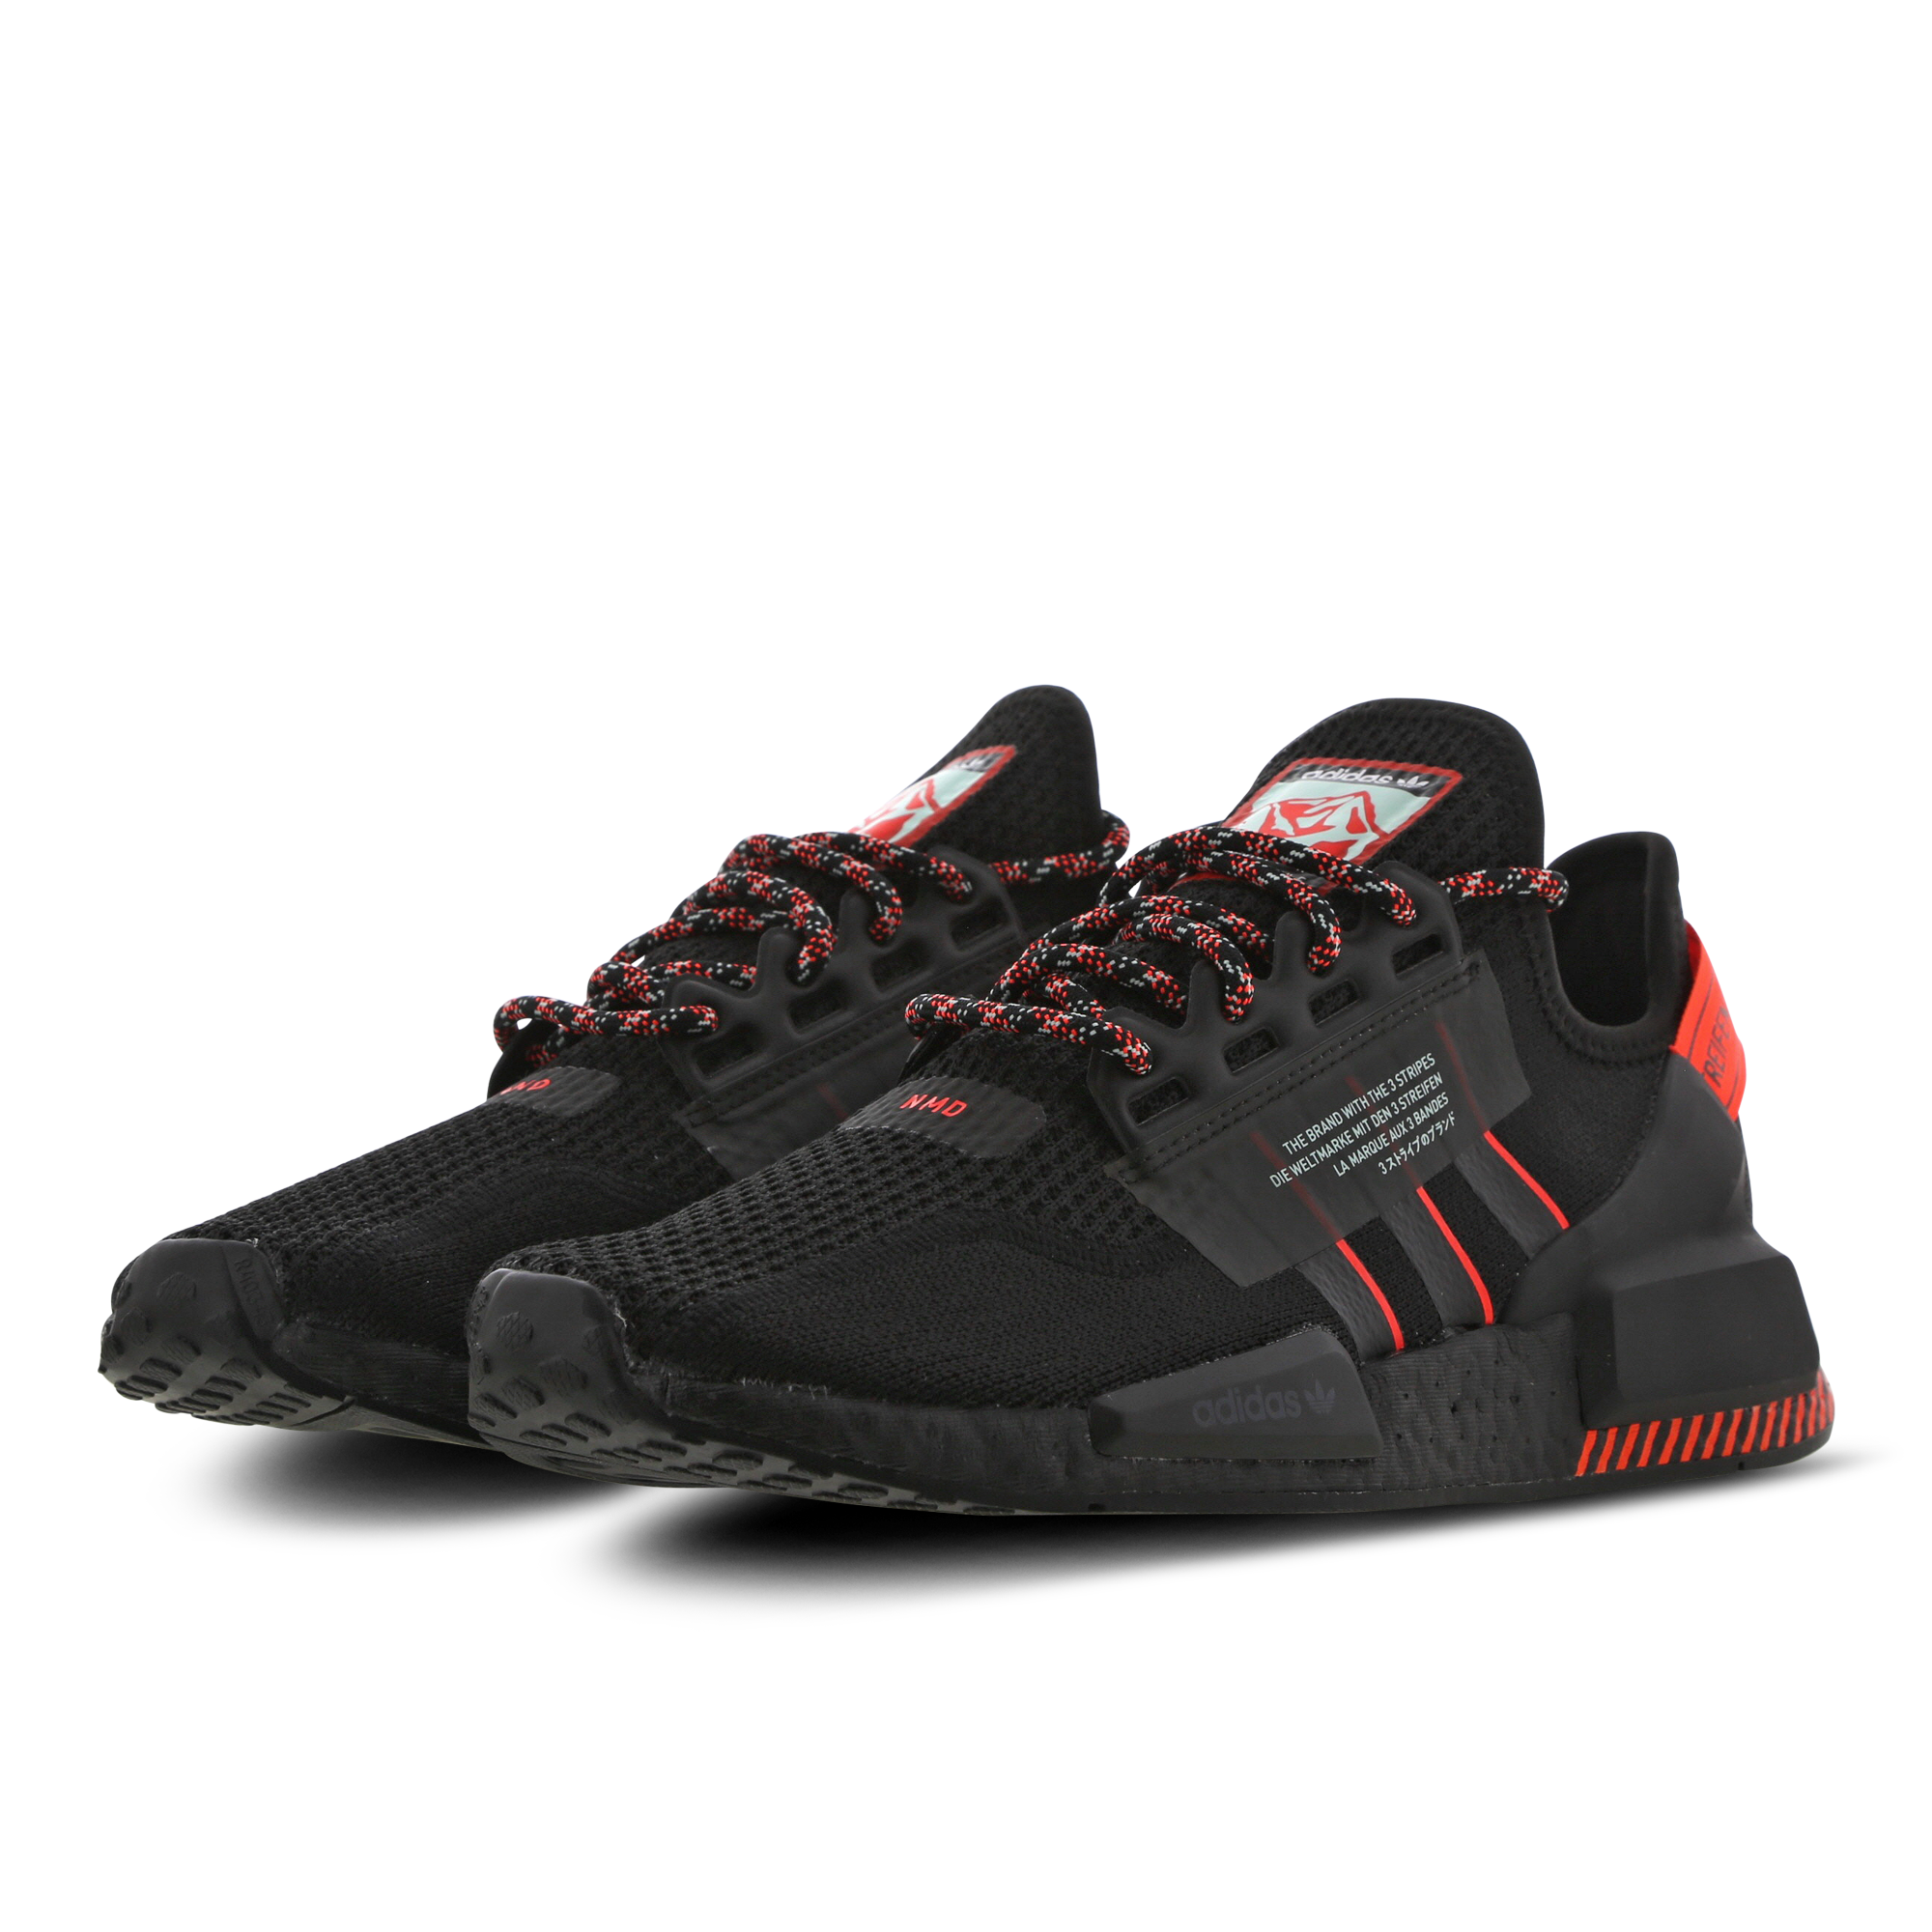 NMD R1 Mens in Core Black Core Black Solar Red by Adidas